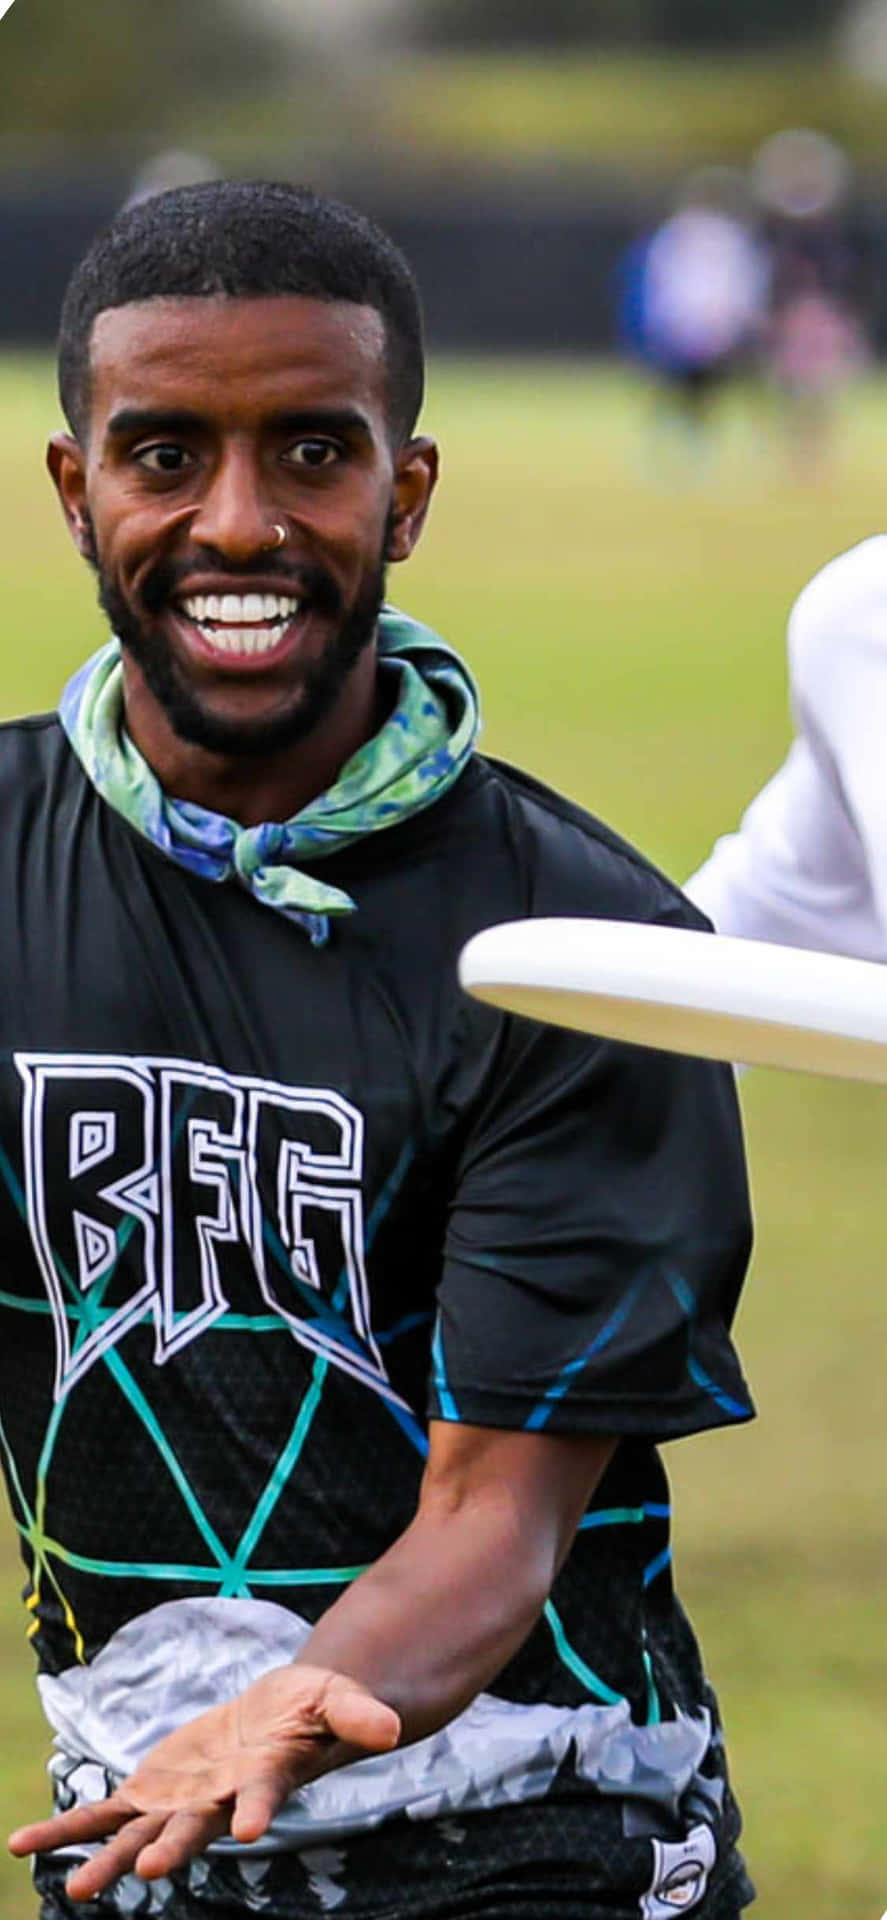 Iphone X Ultimate Frisbee Background Smiling